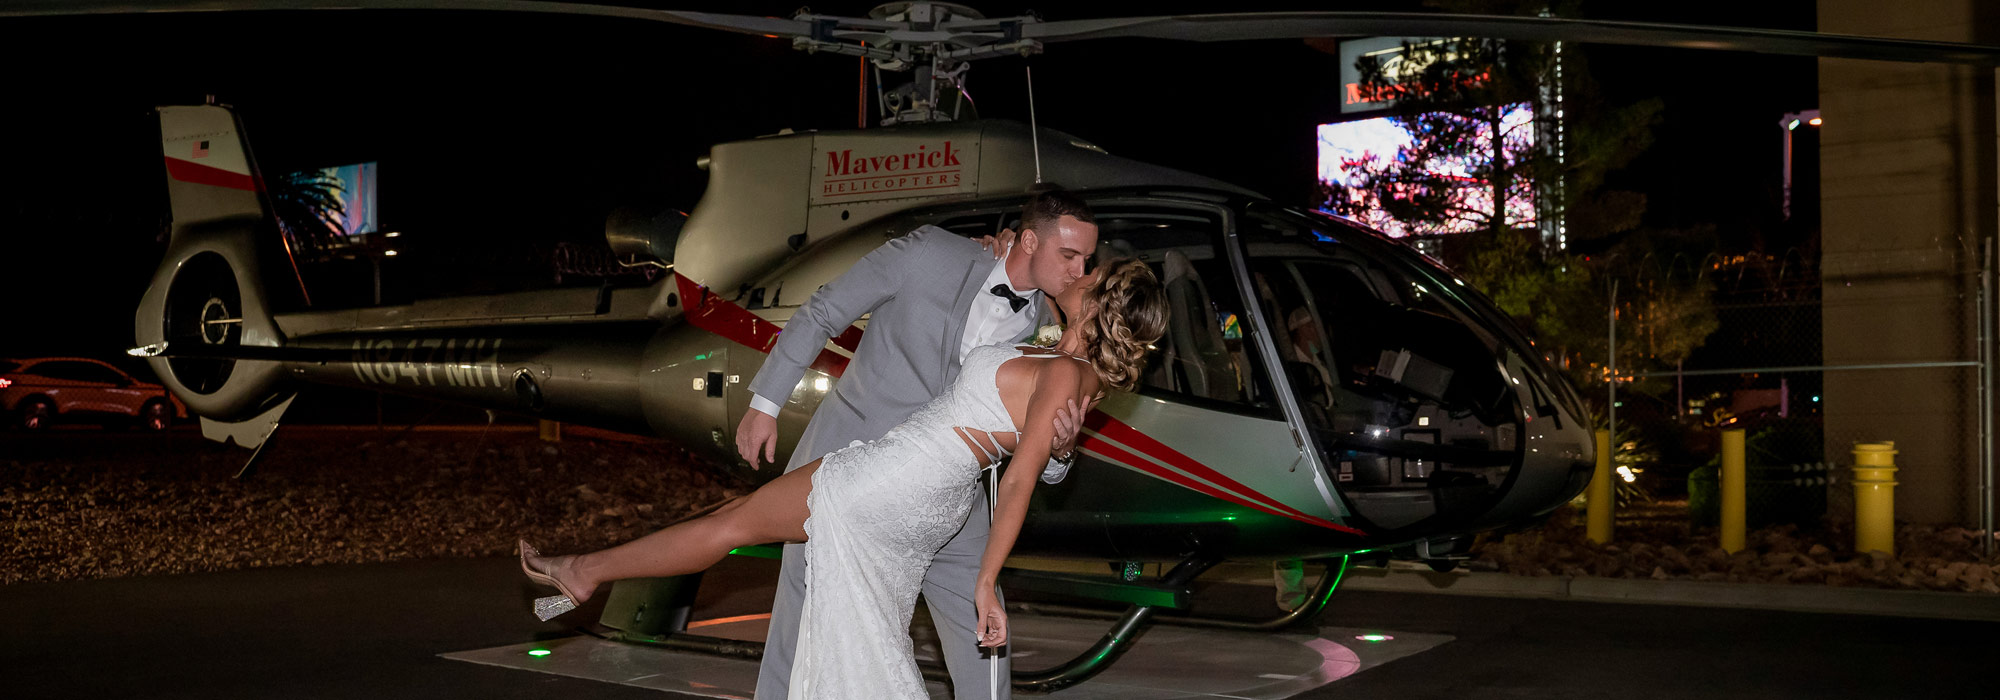 Las Vegas Wedding Packages with Maverick Helicopters